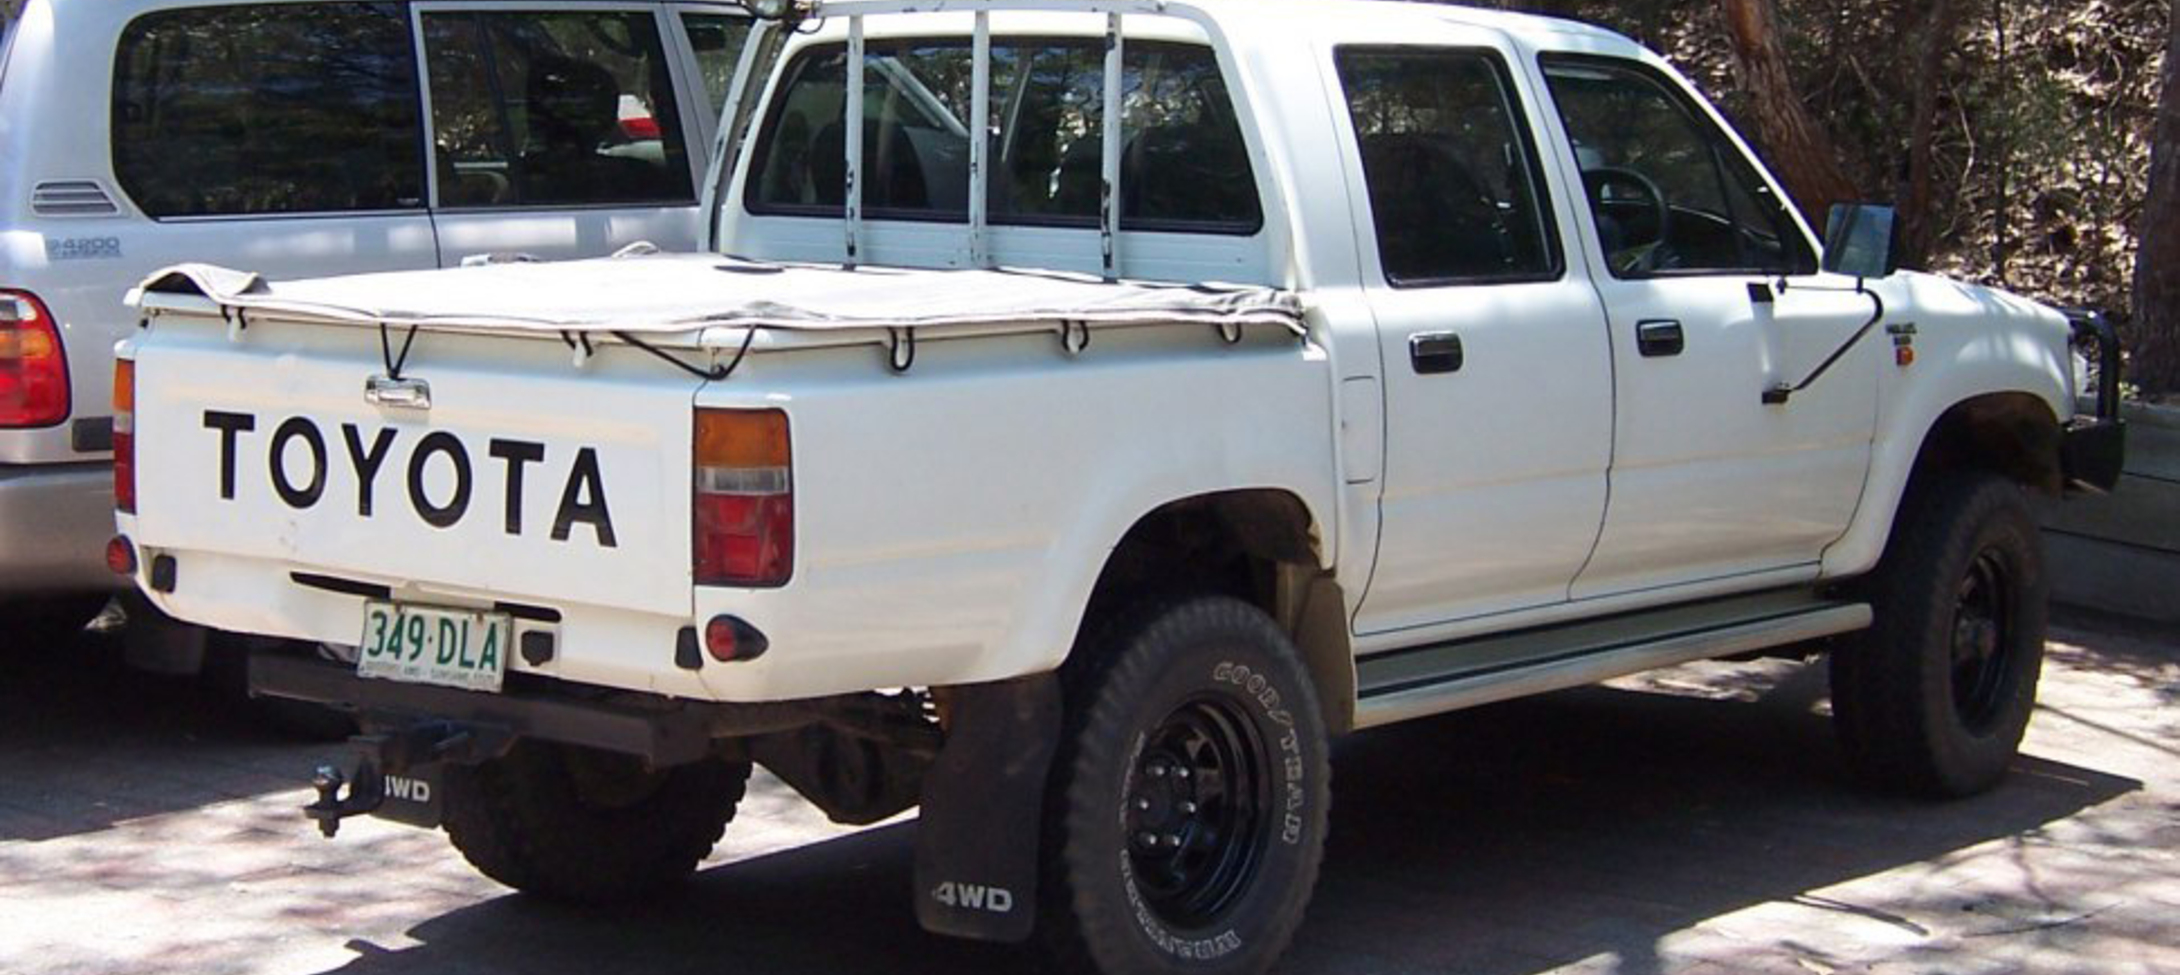 Toyota Hilux Pick Up 3.0 D (91 Hp) 1997, 1998, 1999, 2000, 2001, 2002, 2003, 2004 